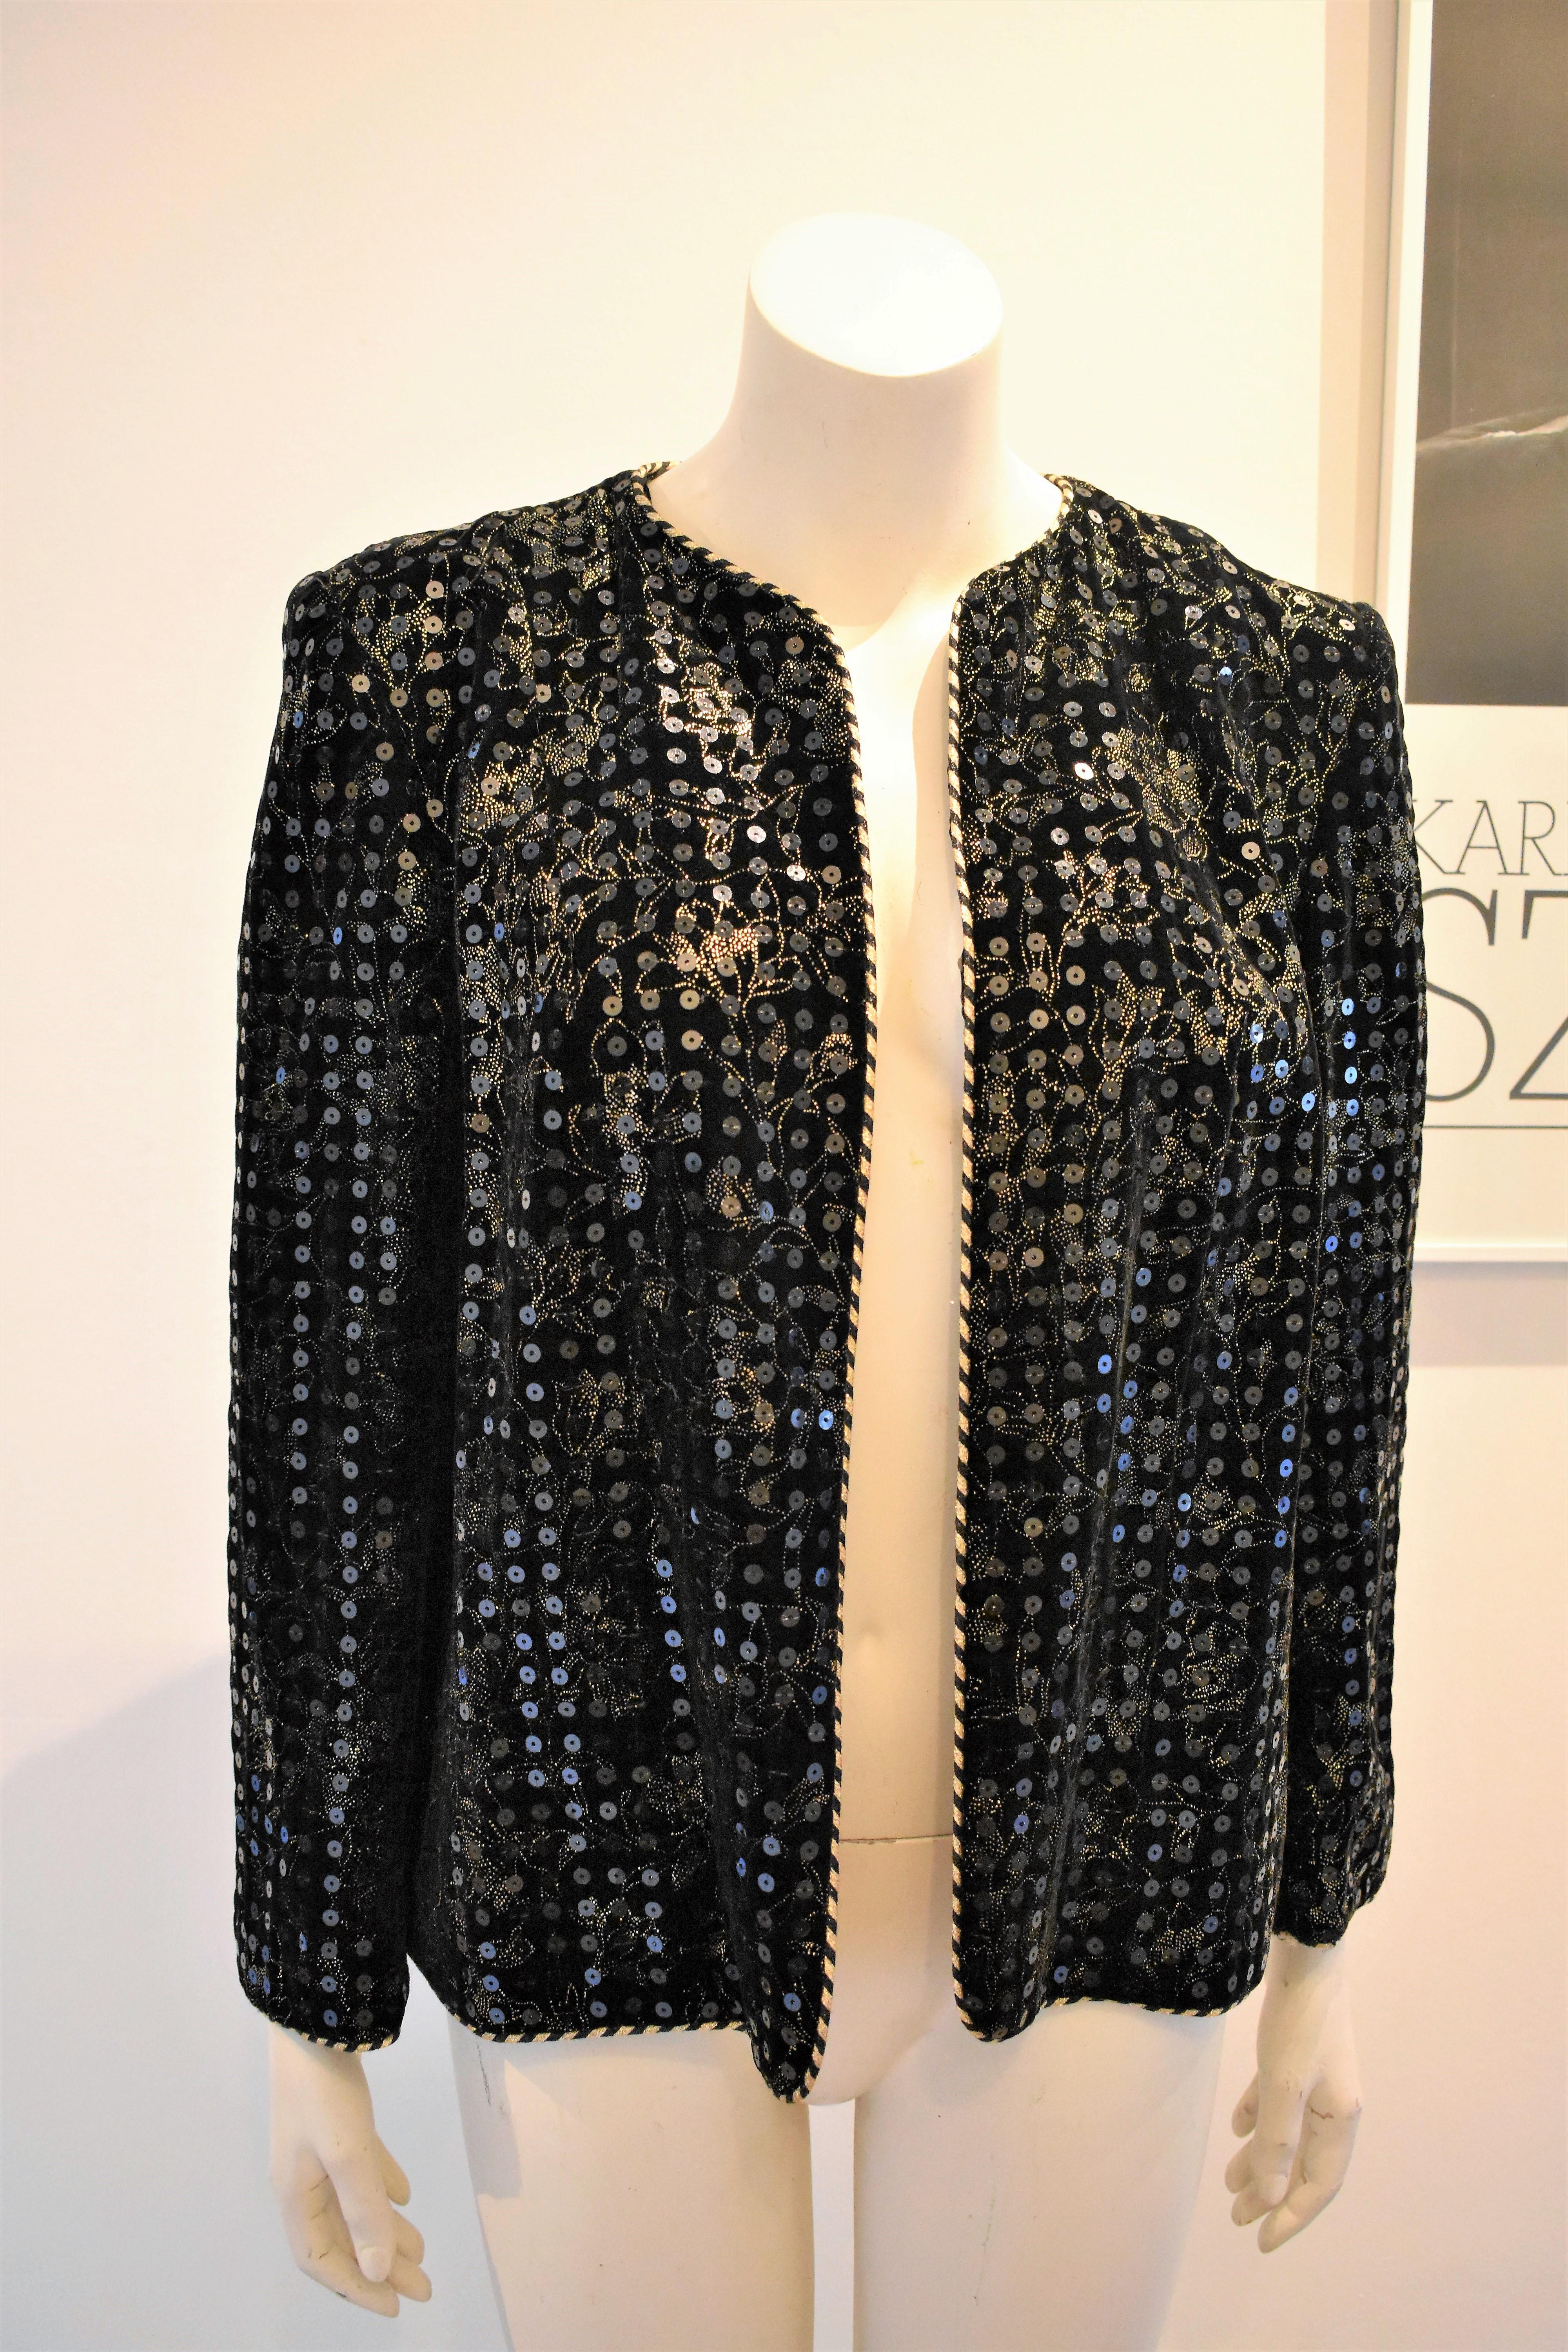 A stunning and dazzling vintage black and gold jacket by Celine Paris in great condition.

Size: Approximately L

Measurements:
Shoulder to Shoulder 46 cm /  18.1 inch
Arms 57 cm /  22.4 inch 
Length 60 cm /  23.6 inch
Bust  106 cm /  41 inch

